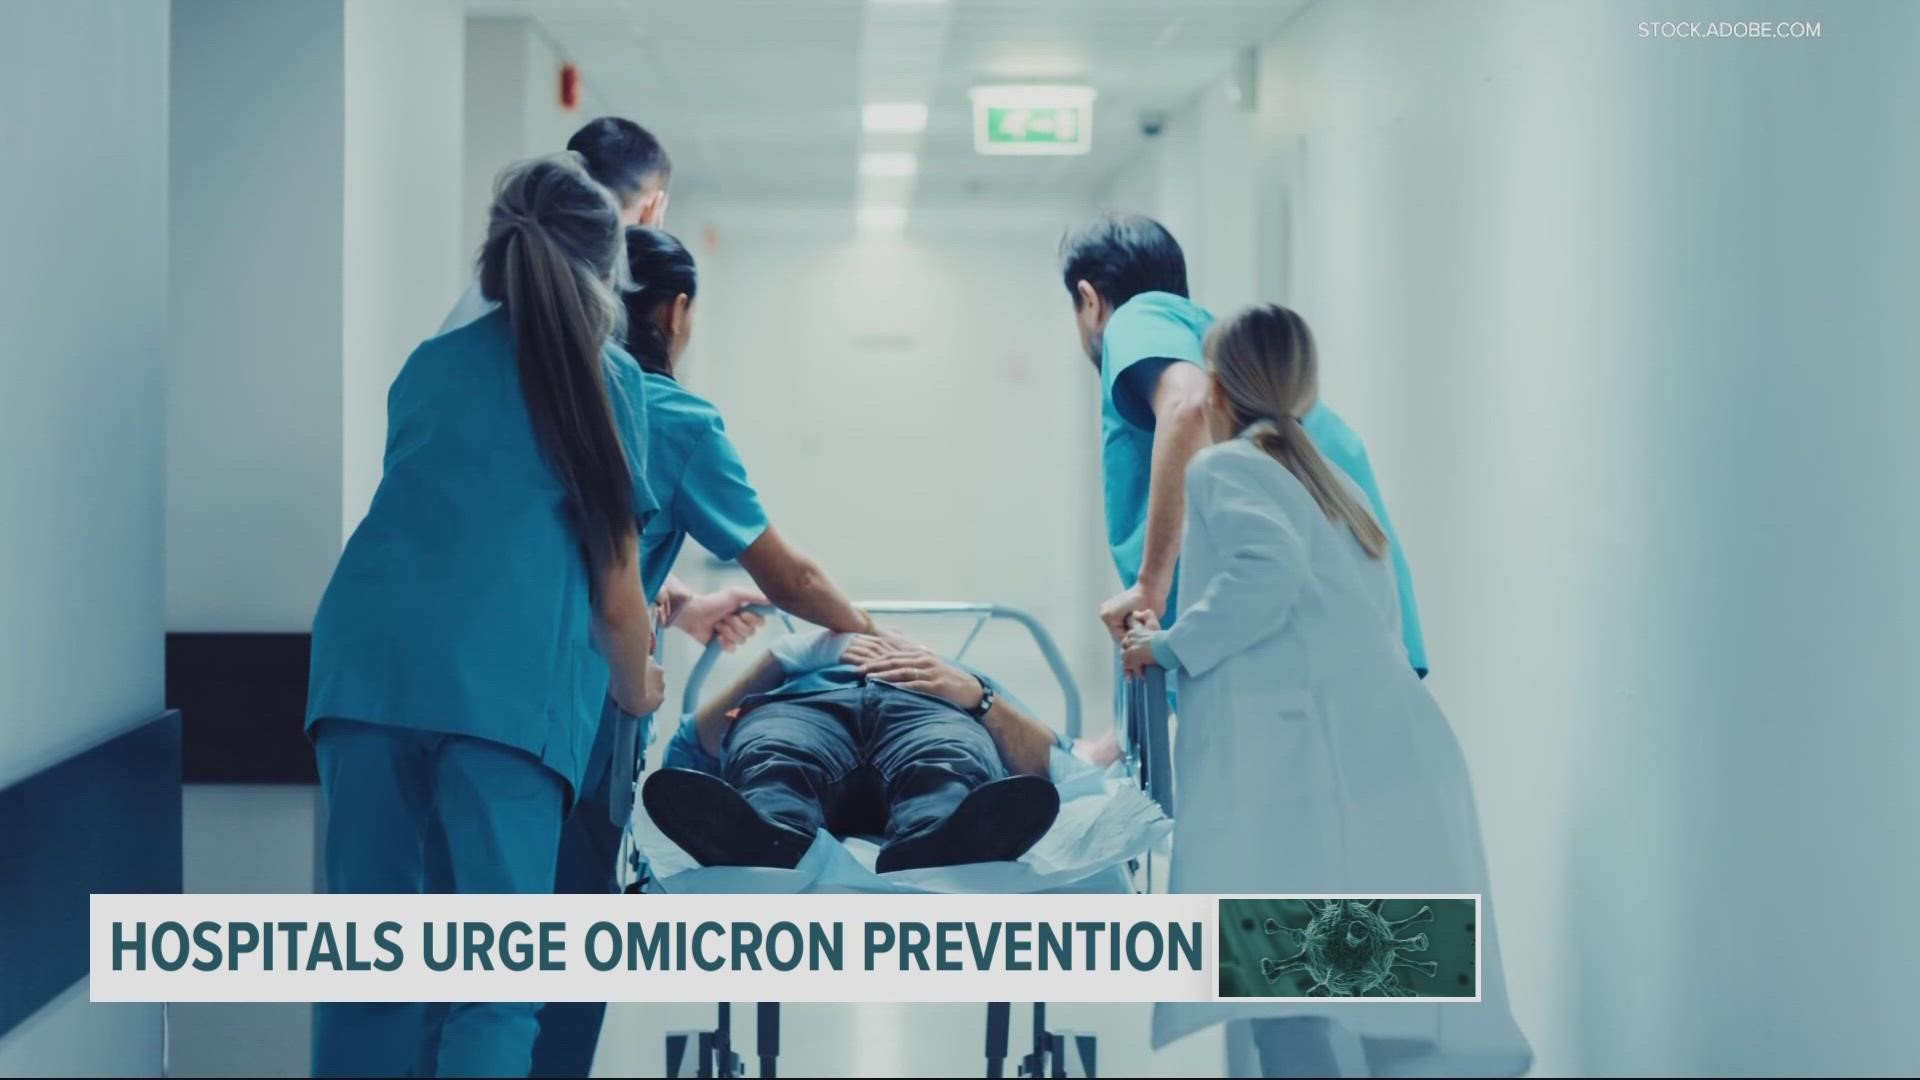 OHSU predicts the omicron surge could lead to 3,000 hospitalizations statewide, more than double that of the delta wave.